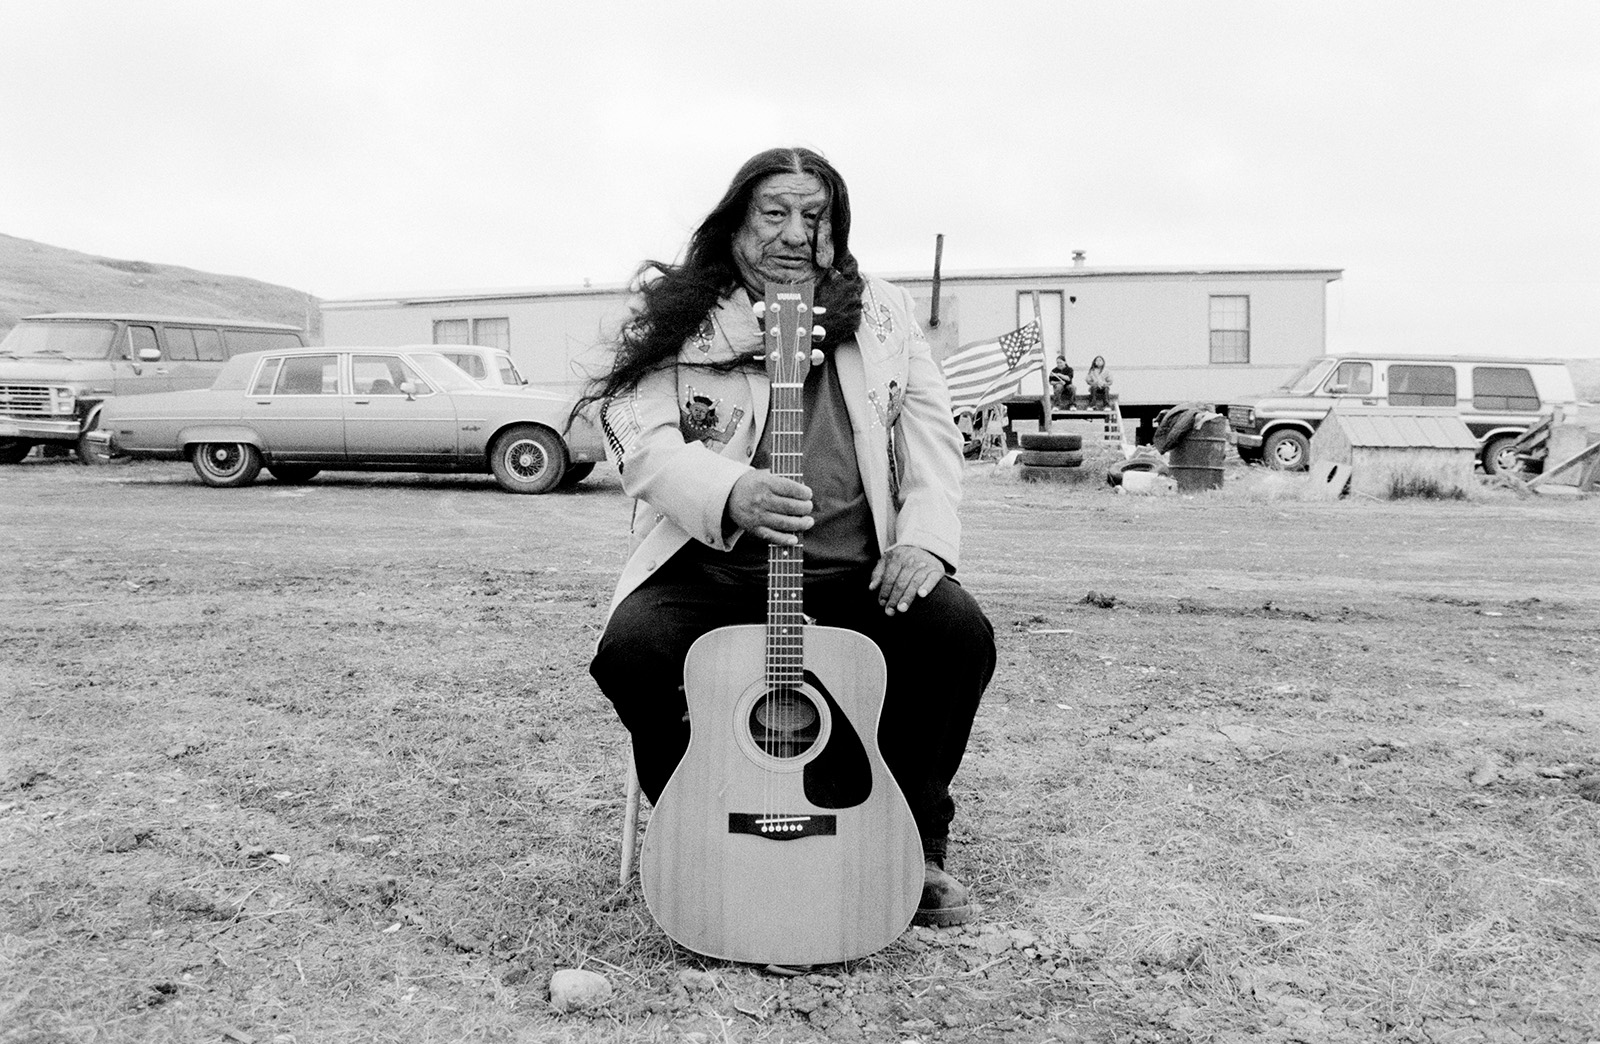 Man with long black hair sitting on a chair in front of a trailer holding a guitar.